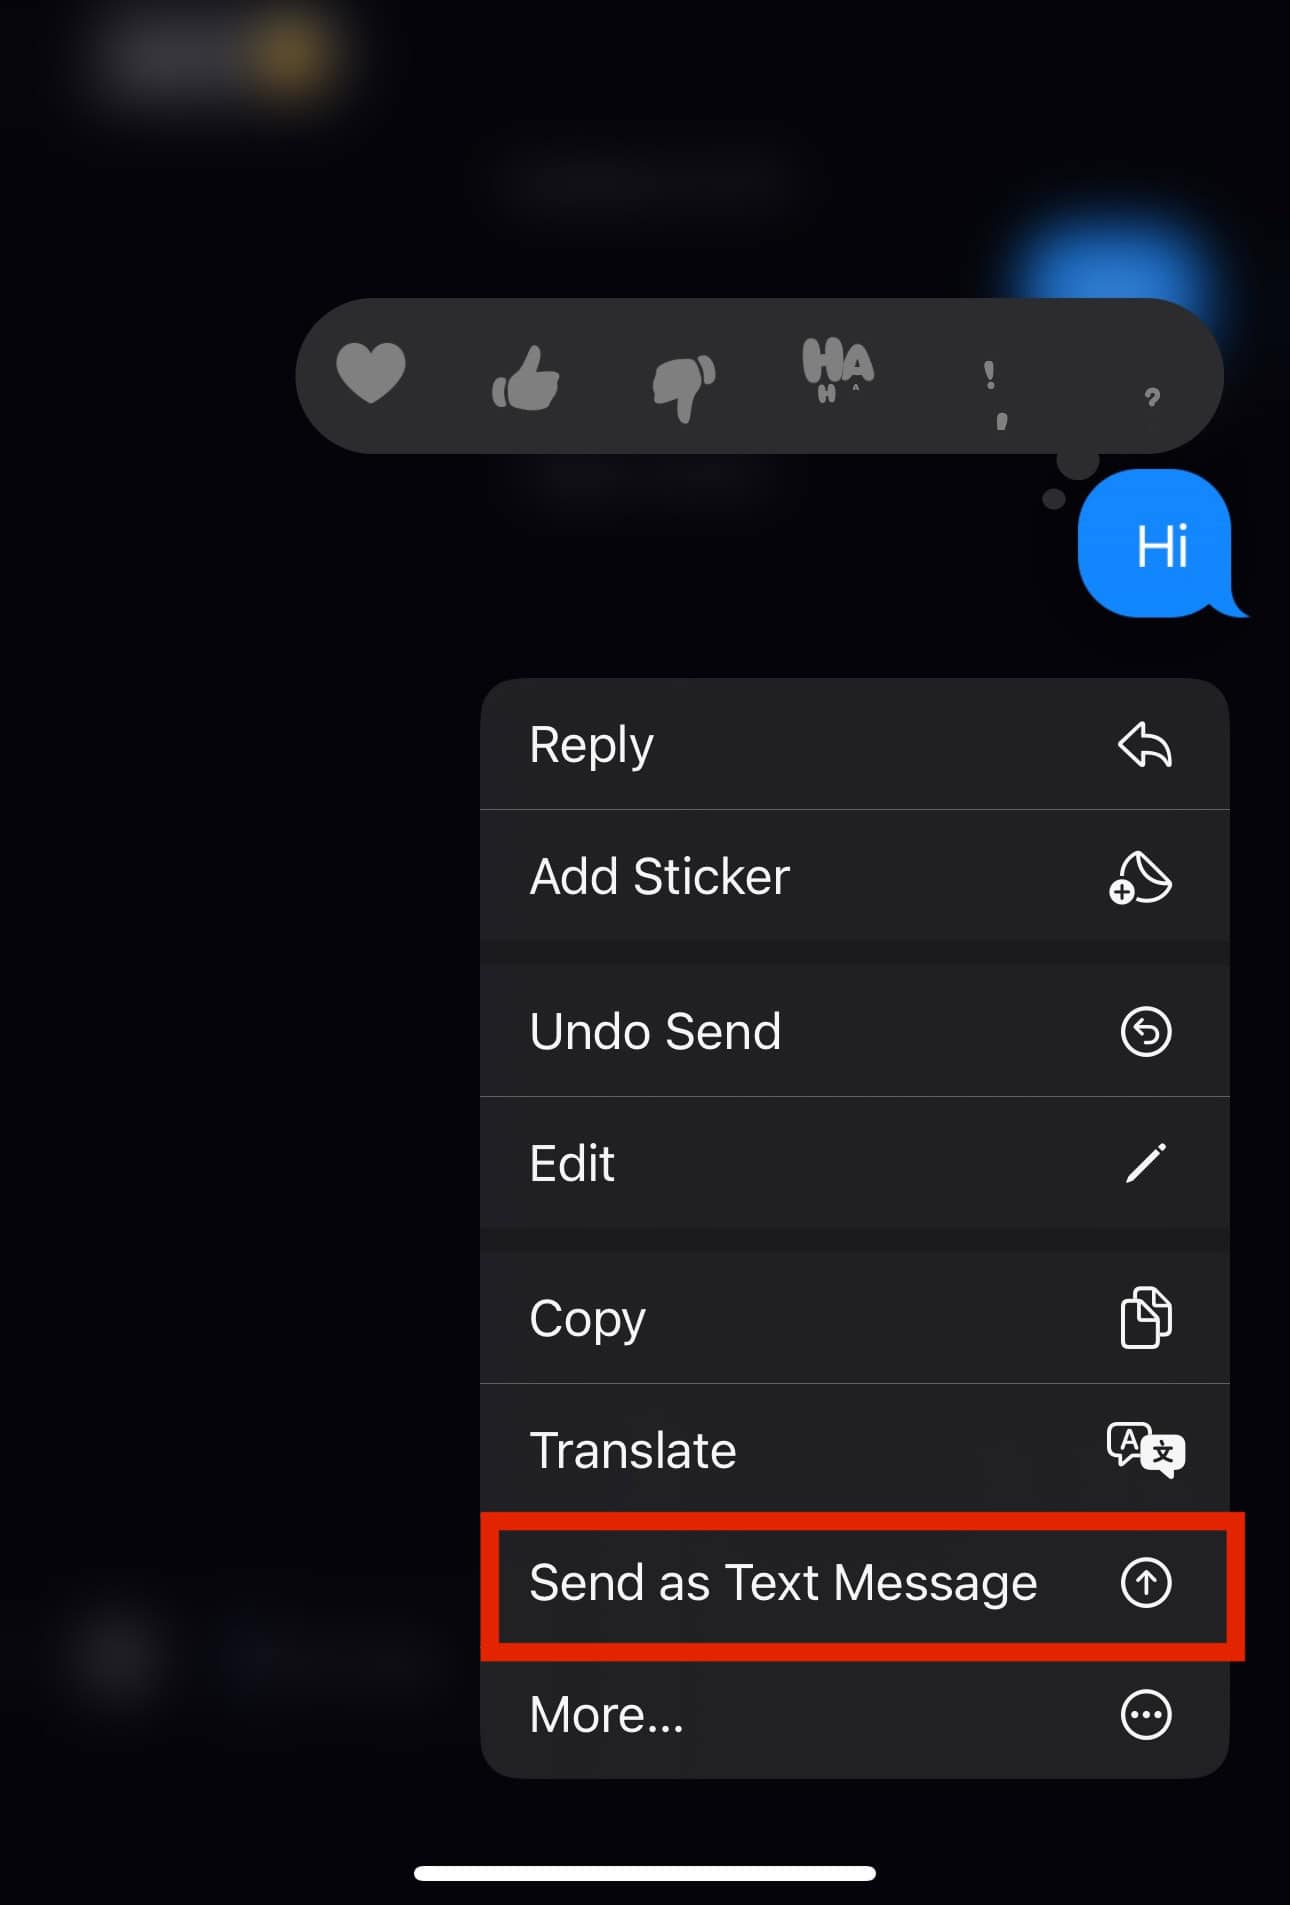 pop-up menu that appears when you send a text message